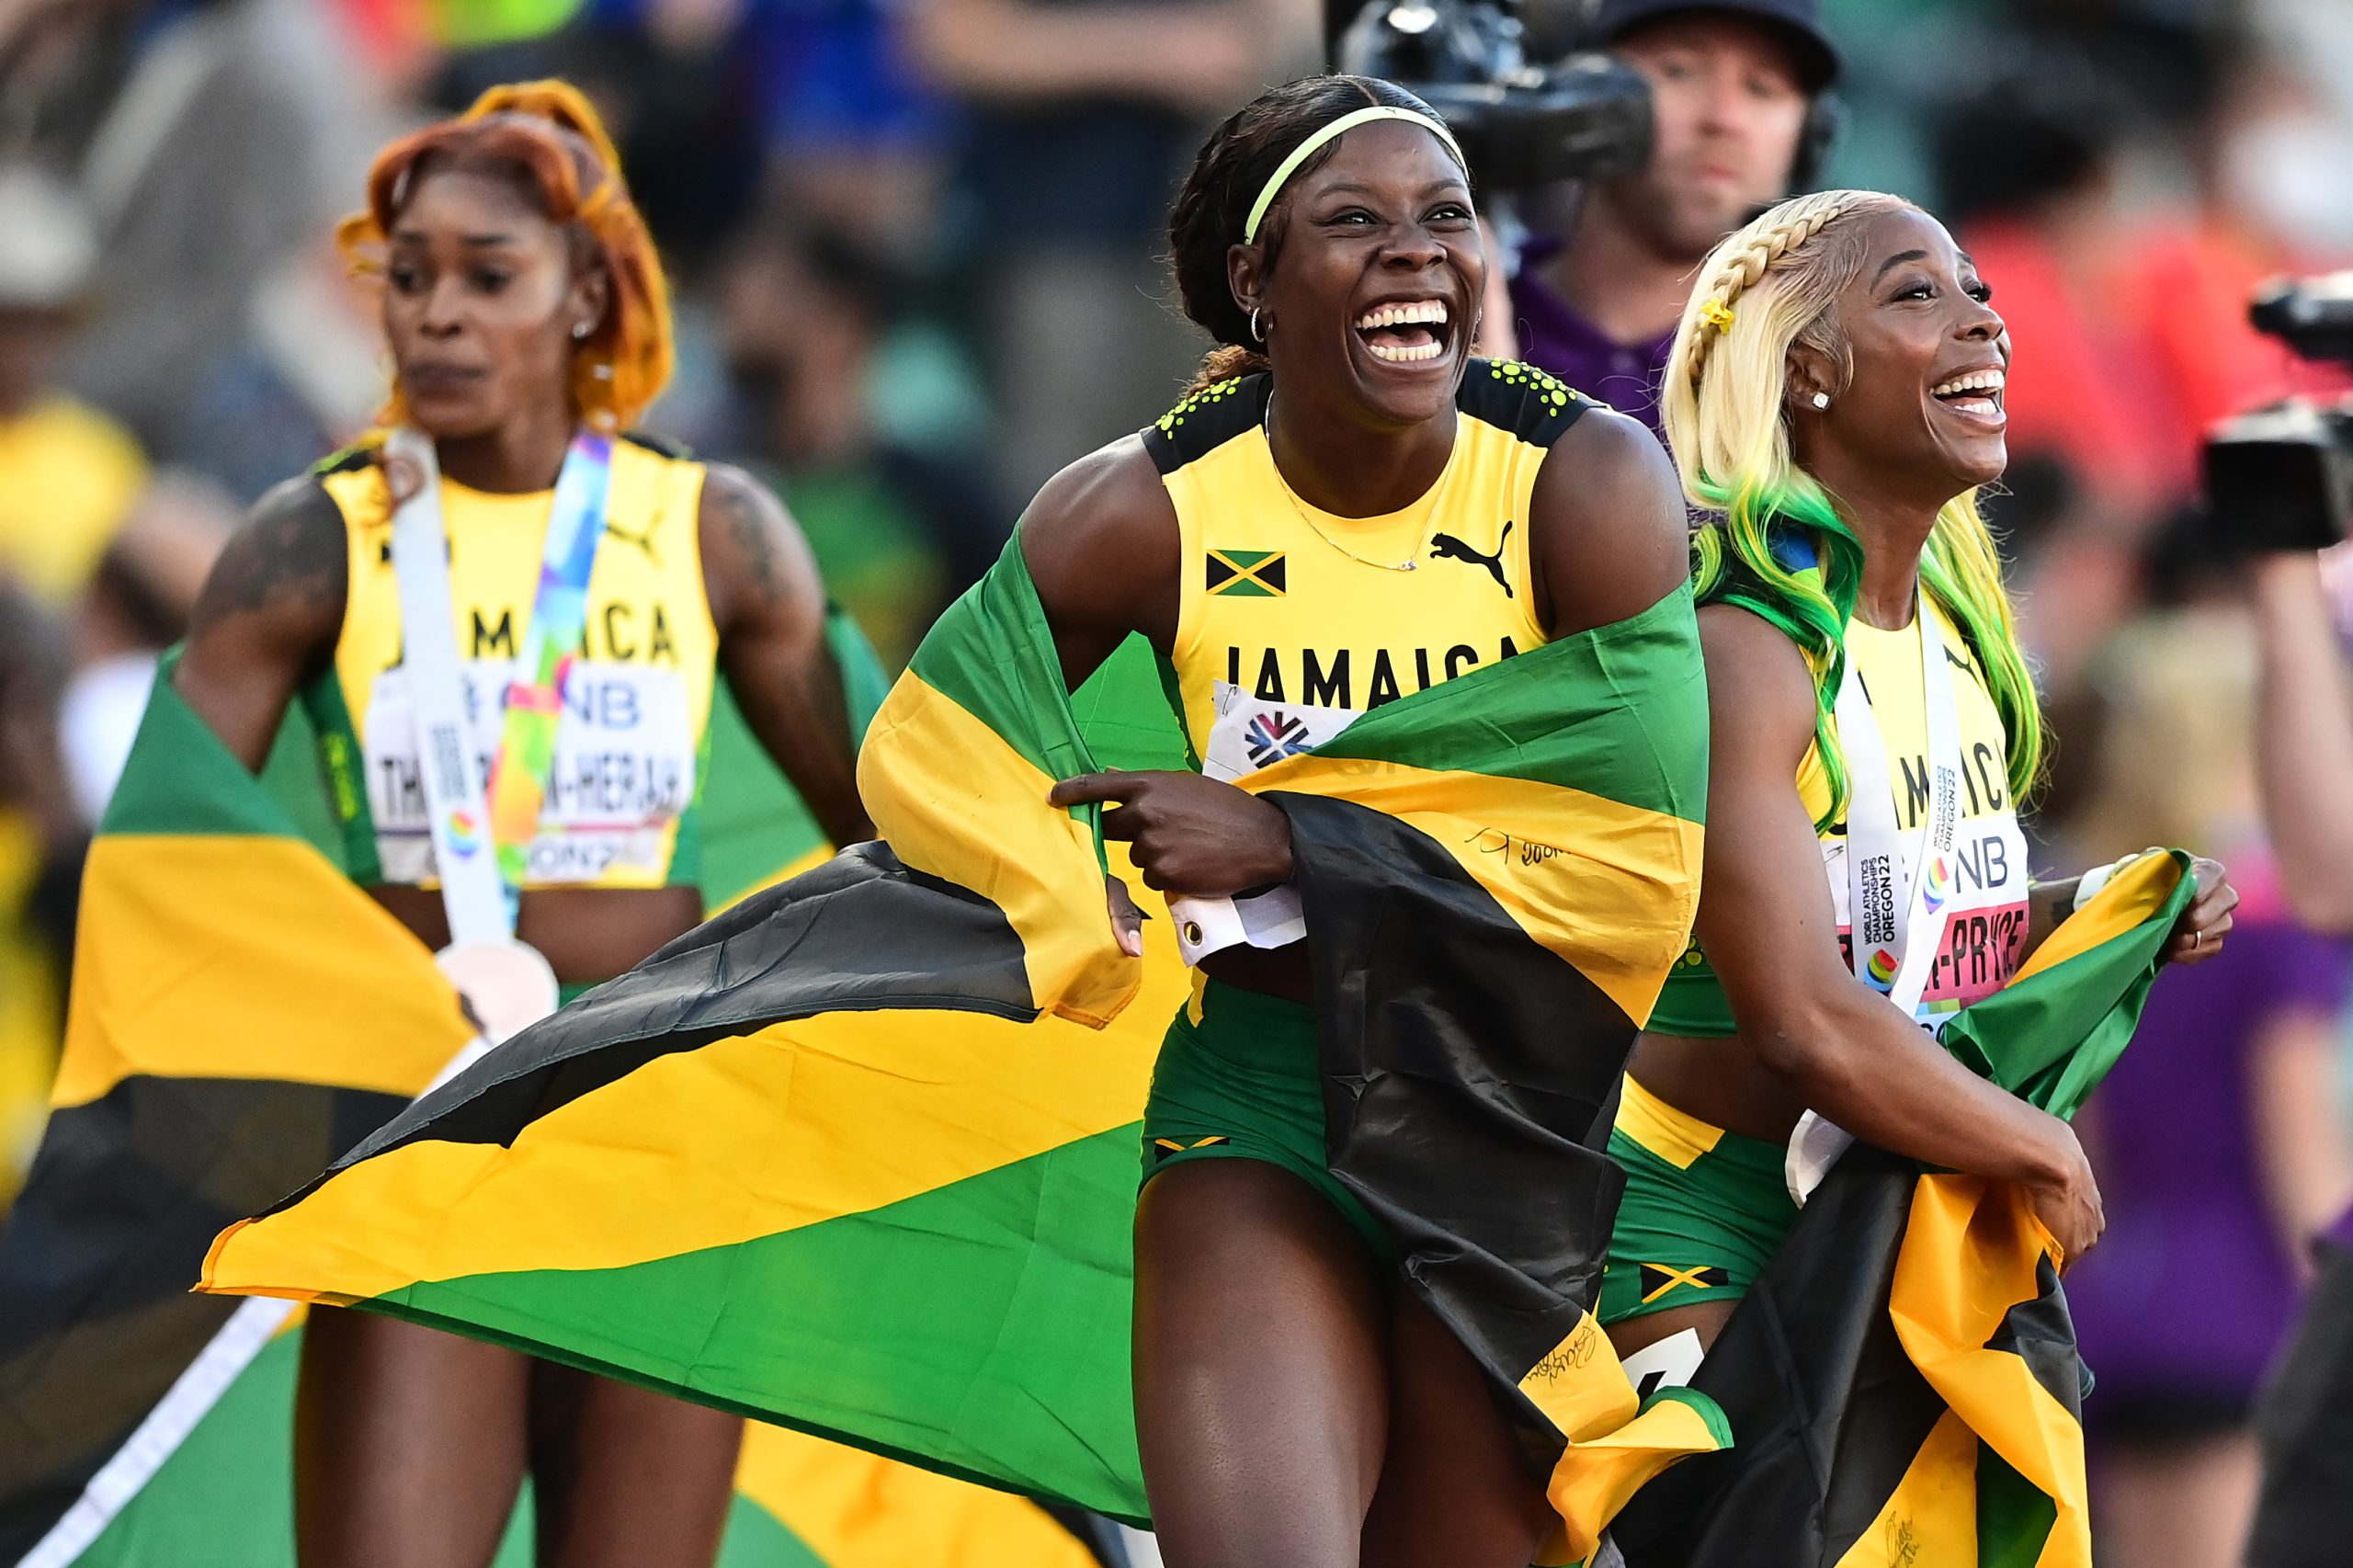 Brussels Diamond League, Budapest 23 now ... Jamaican athletes, left to right, Elaine Thompson-Herah, Shericka Jackson and Shelly-Ann Fraser-Pryce celebrate their 1-2-3 finish in the women's 100m final at Oregon22 World Athletics Championships